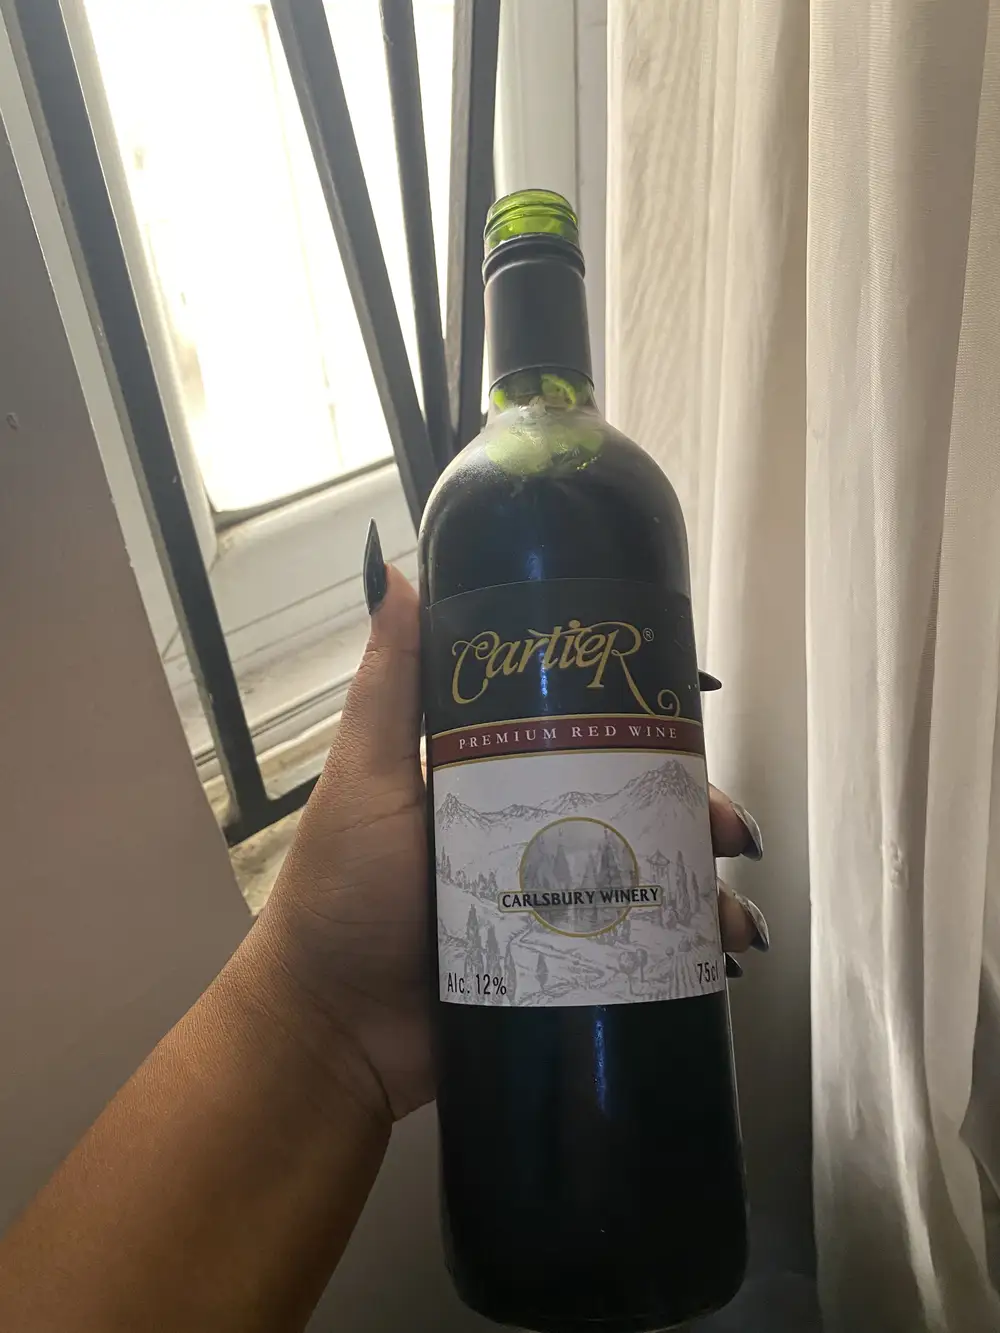 A bottle of red